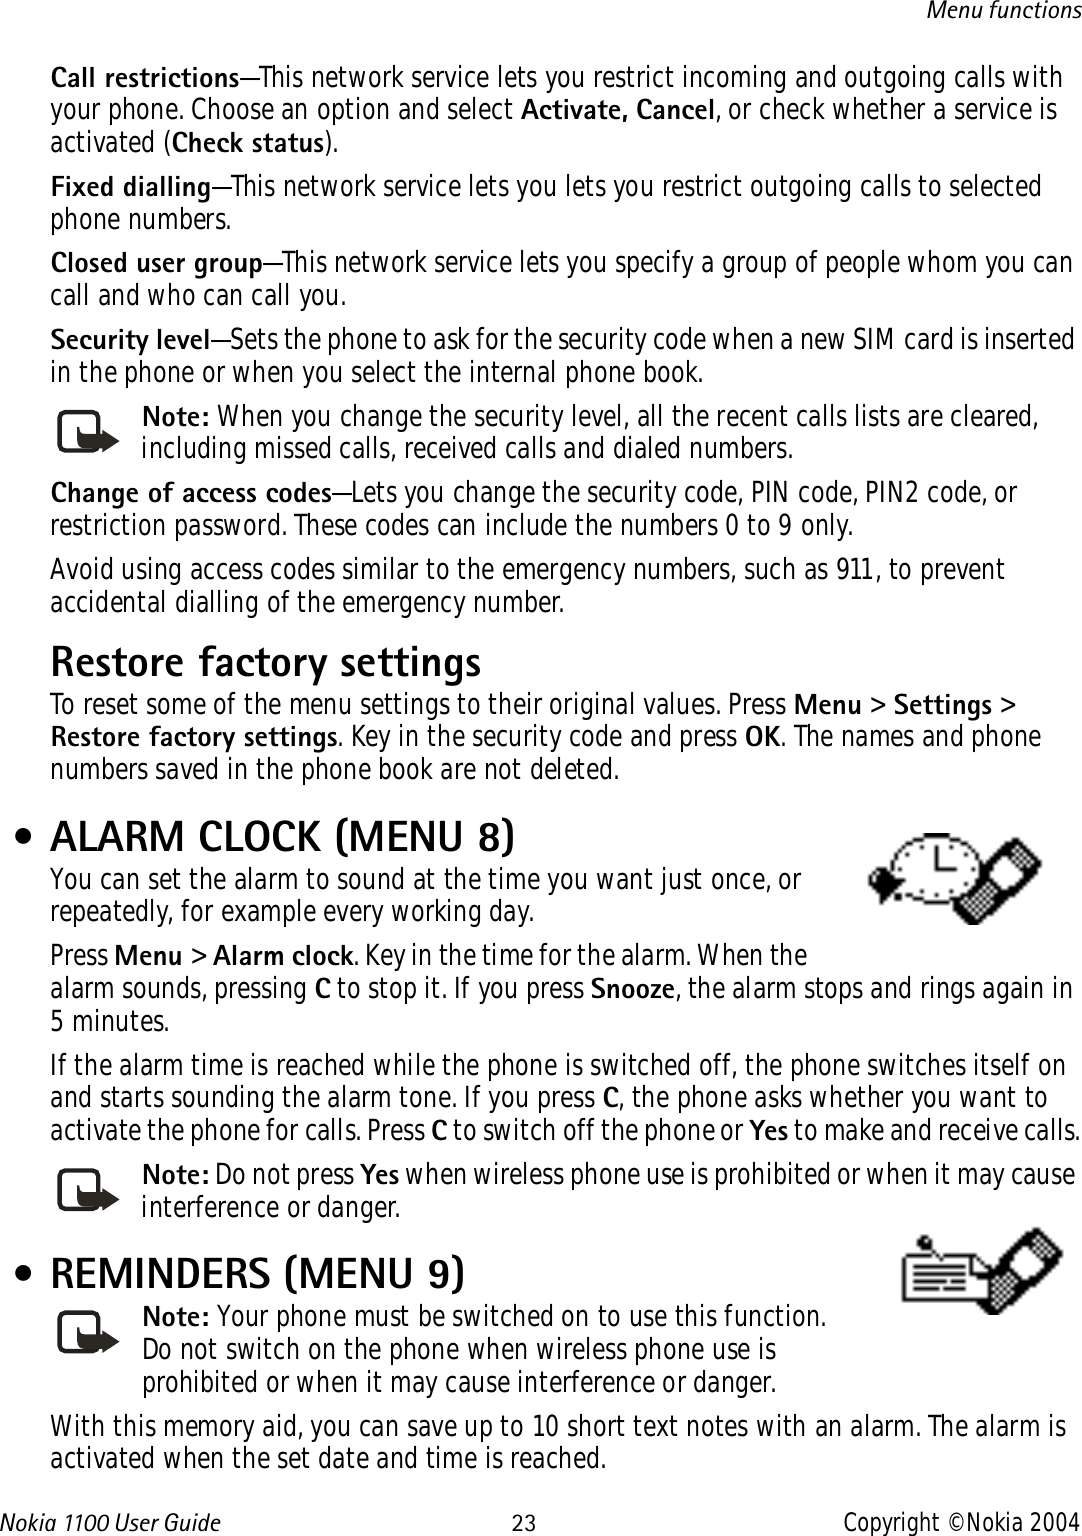 Nokia 110 0  User Guide 23 Copyright © Nokia 2004Menu functionsCall restrictions—This network service lets you restrict incoming and outgoing calls with your phone. Choose an option and select Activate, Cancel, or check whether a service is activated (Check status).Fixed dialling—This network service lets you lets you restrict outgoing calls to selected phone numbers.Closed user group—This network service lets you specify a group of people whom you can call and who can call you.Security level—Sets the phone to ask for the security code when a new SIM card is inserted in the phone or when you select the internal phone book.Note: When you change the security level, all the recent calls lists are cleared, including missed calls, received calls and dialed numbers.Change of access codes—Lets you change the security code, PIN code, PIN2 code, or restriction password. These codes can include the numbers 0 to 9 only.Avoid using access codes similar to the emergency numbers, such as 911, to prevent accidental dialling of the emergency number.Restore factory settings To reset some of the menu settings to their original values. Press Menu &gt; Settings &gt; Restore factory settings. Key in the security code and press OK. The names and phone numbers saved in the phone book are not deleted. • ALARM CLOCK (MENU 8)You can set the alarm to sound at the time you want just once, or repeatedly, for example every working day. Press Menu &gt; Alarm clock. Key in the time for the alarm. When the alarm sounds, pressing C to stop it. If you press Snooze, the alarm stops and rings again in 5 minutes.If the alarm time is reached while the phone is switched off, the phone switches itself on and starts sounding the alarm tone. If you press C, the phone asks whether you want to activate the phone for calls. Press C to switch off the phone or Yes to make and receive calls.Note: Do not press Yes when wireless phone use is prohibited or when it may cause interference or danger. • REMINDERS (MENU 9)Note: Your phone must be switched on to use this function. Do not switch on the phone when wireless phone use is prohibited or when it may cause interference or danger.With this memory aid, you can save up to 10 short text notes with an alarm. The alarm is activated when the set date and time is reached.